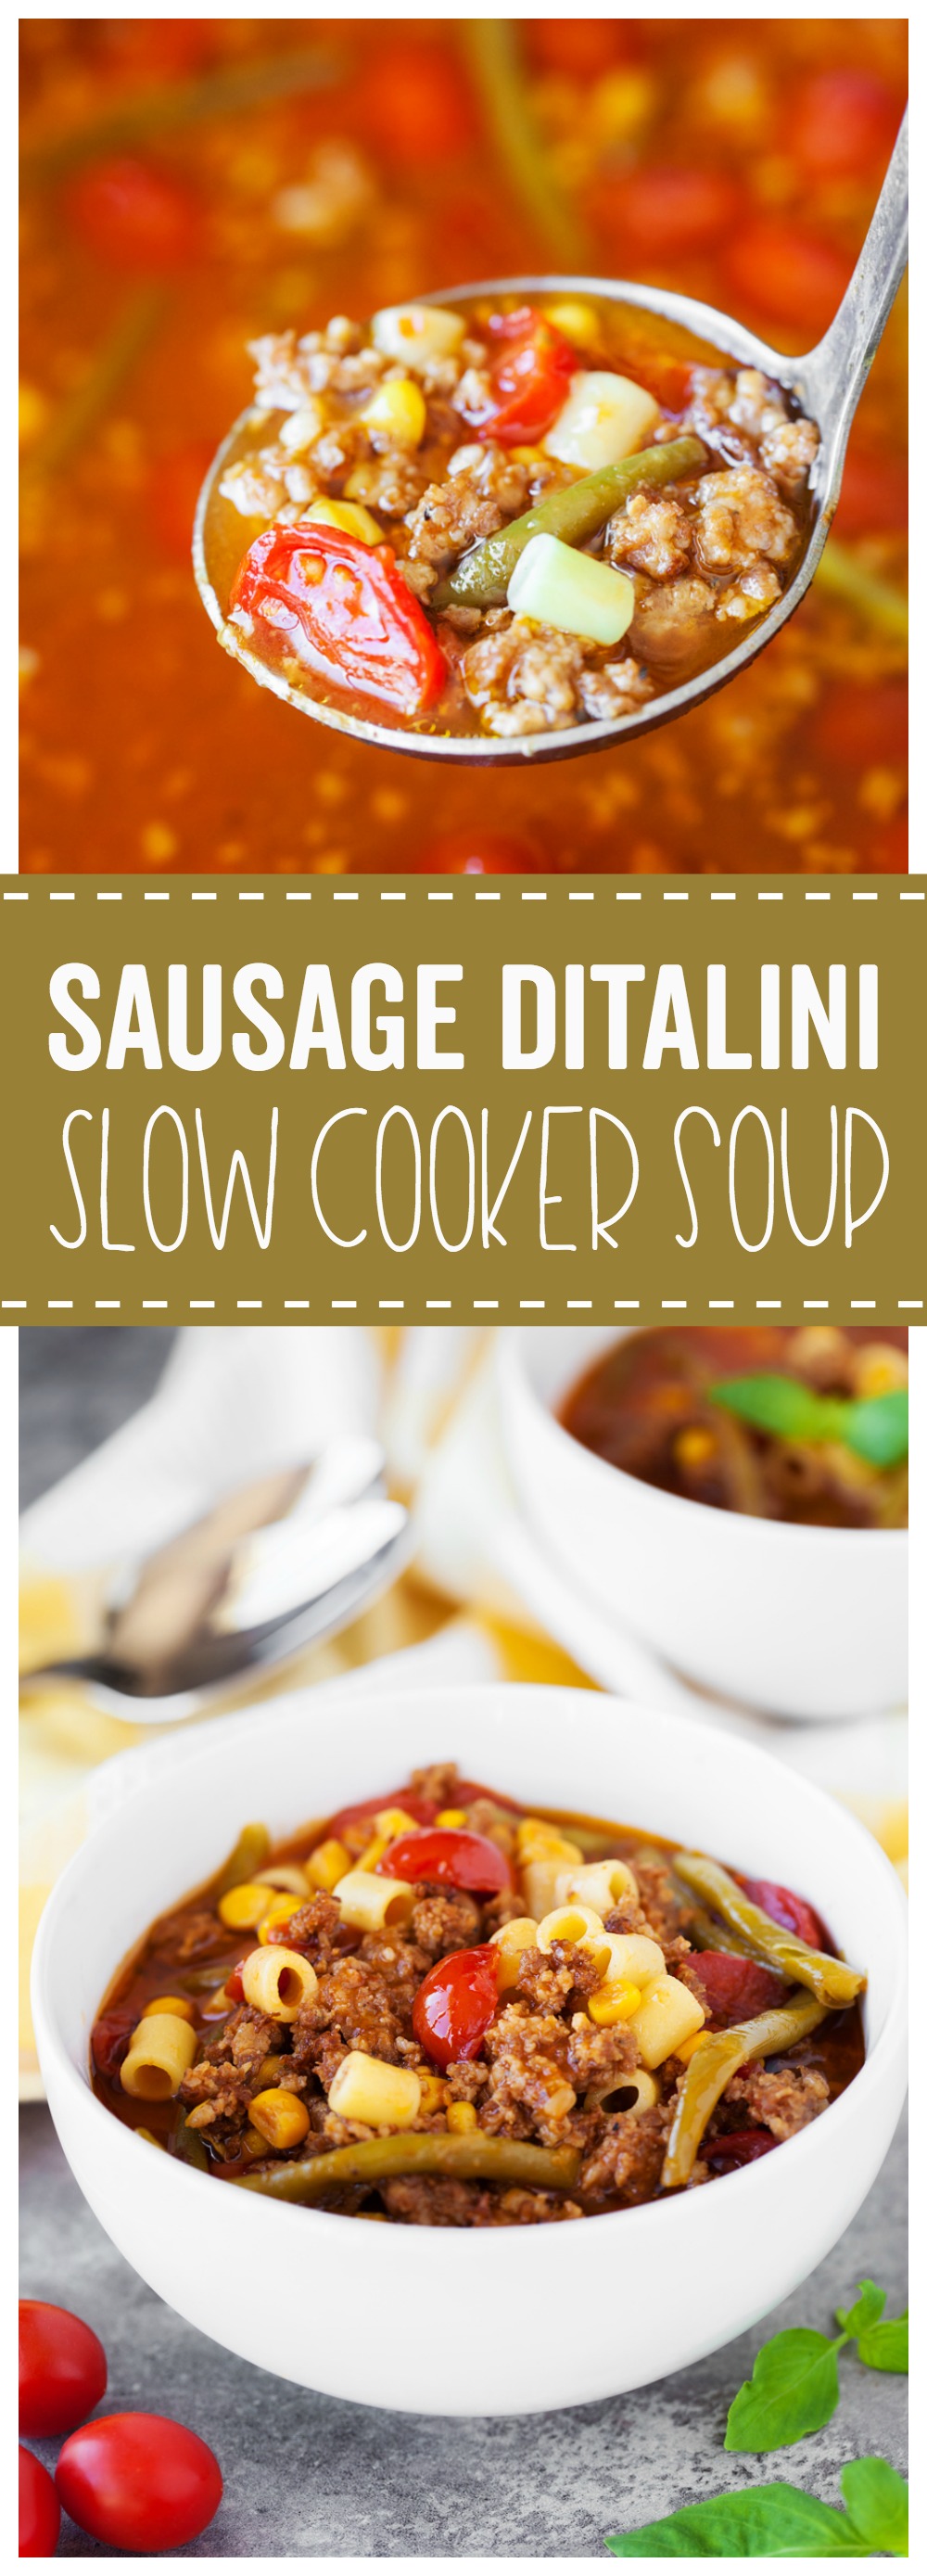 This Slow Cooker Sausage Ditalini soup is full of sausage, tomatoes, green beans and flavor!  It's perfect for the cold winter months!